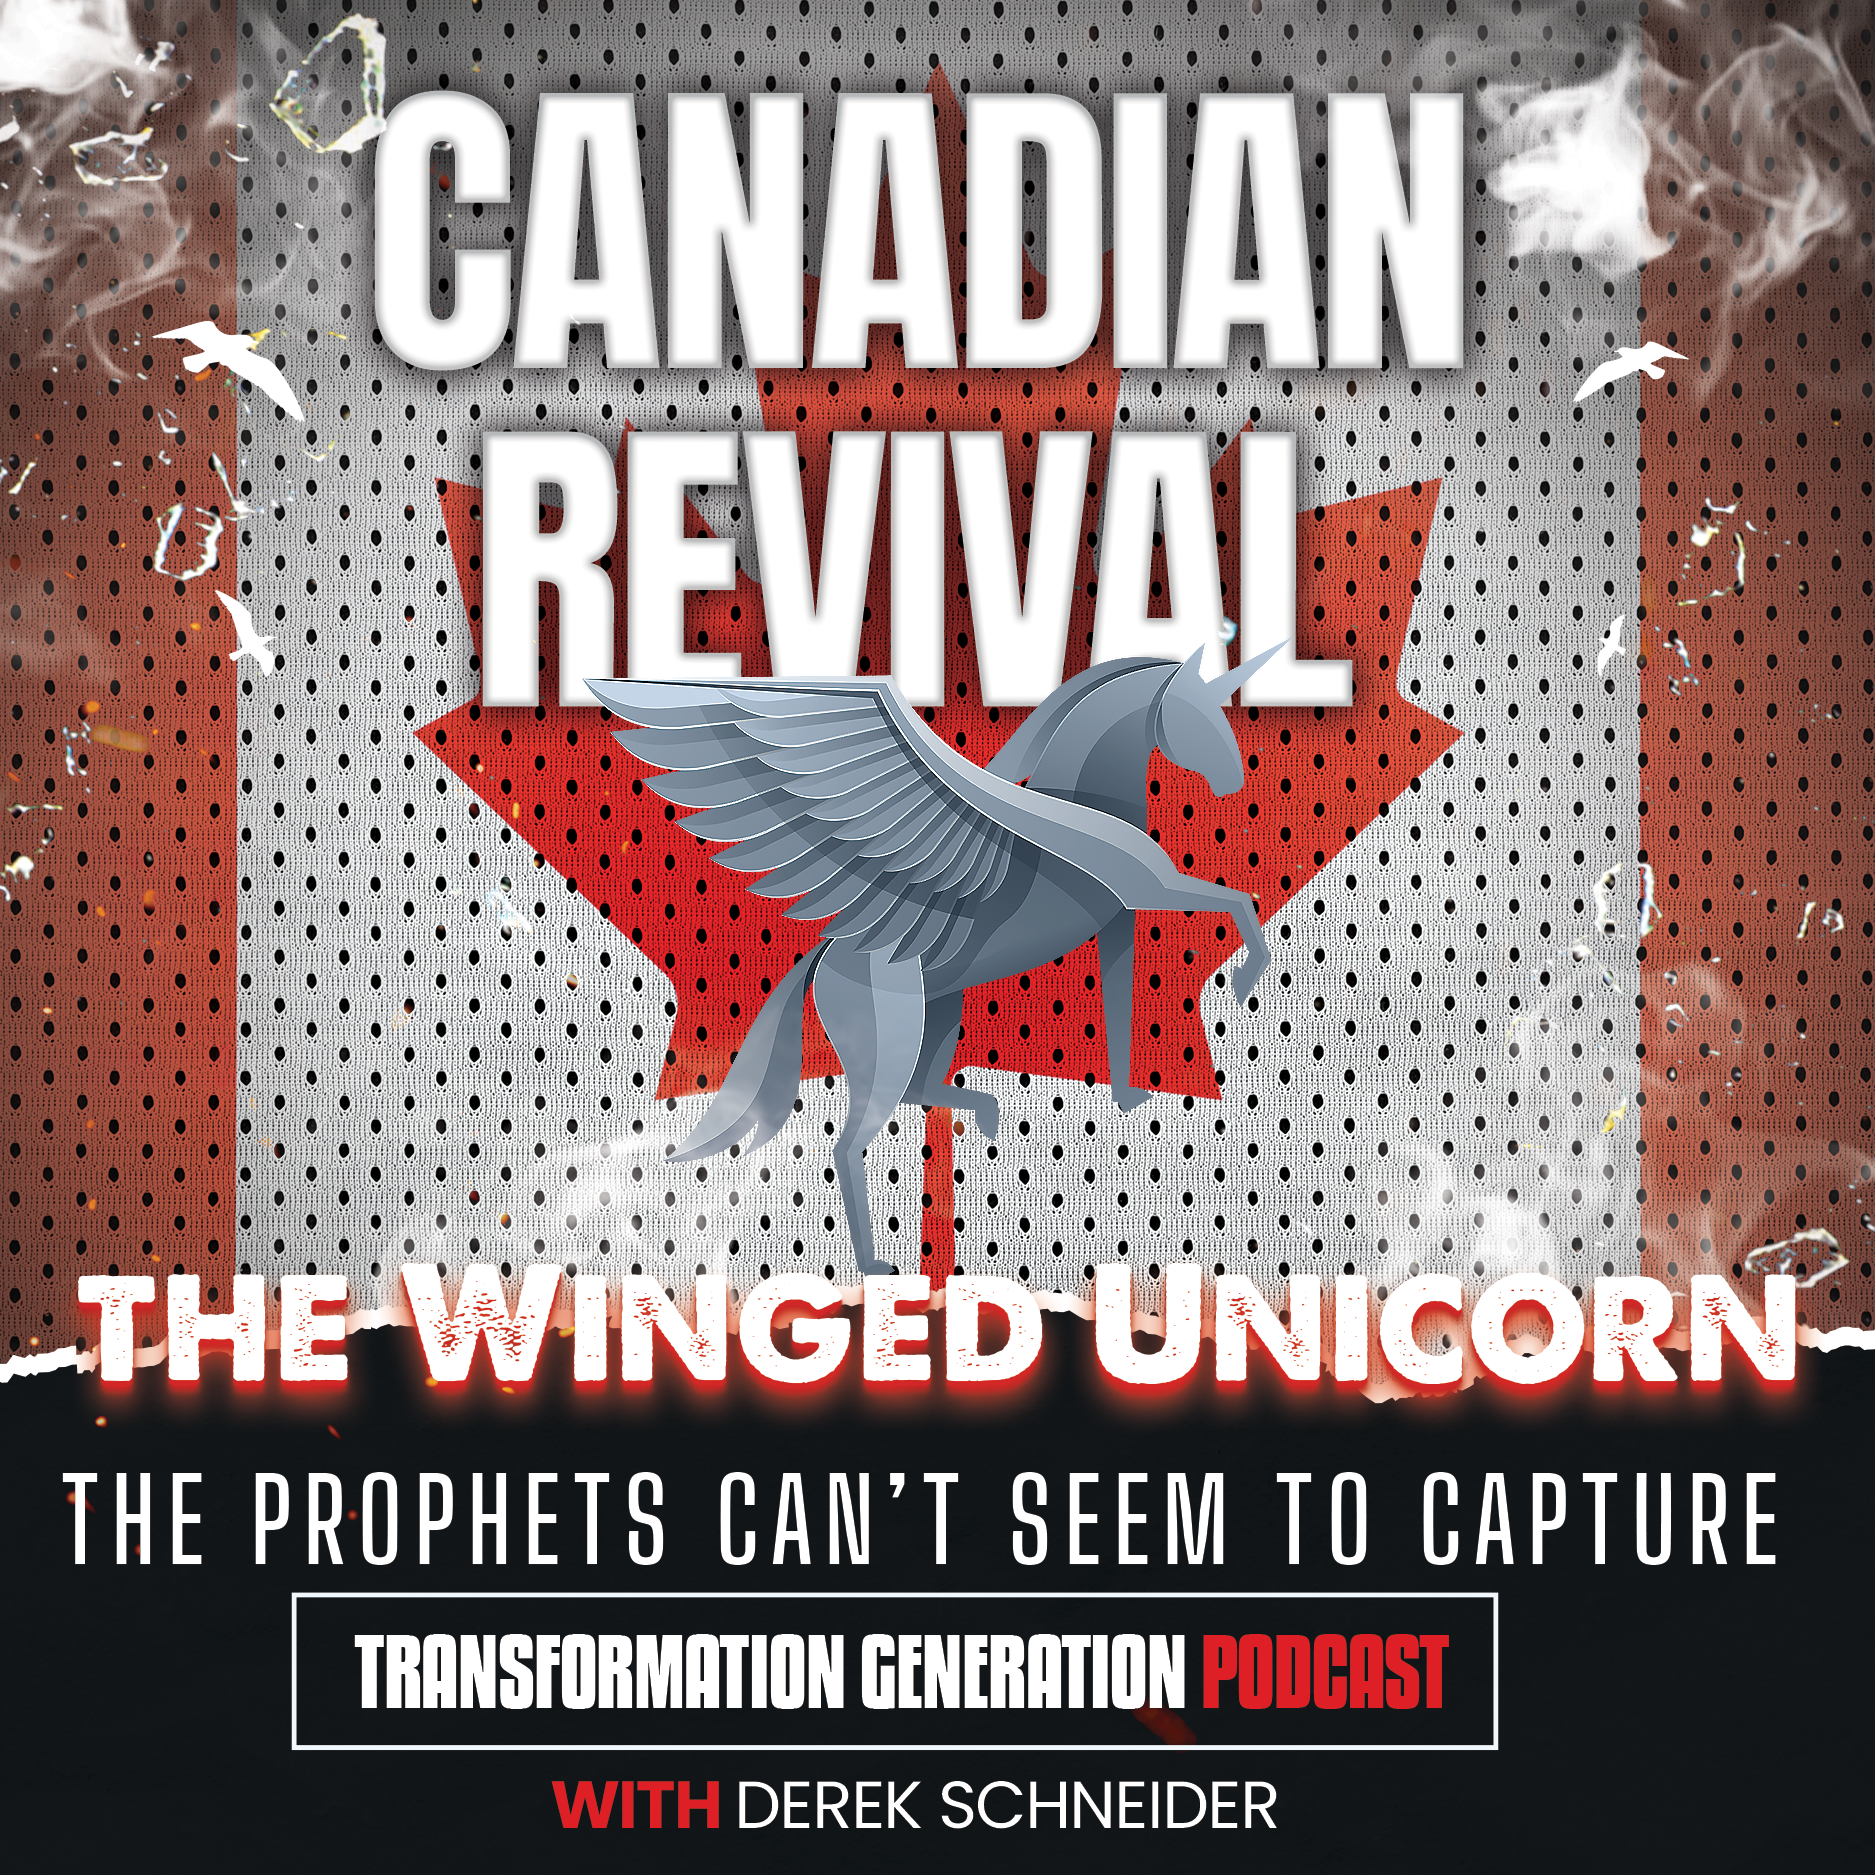 Canadian Revival: The Winged Unicorn the Prophets Can’t Seem to Capture